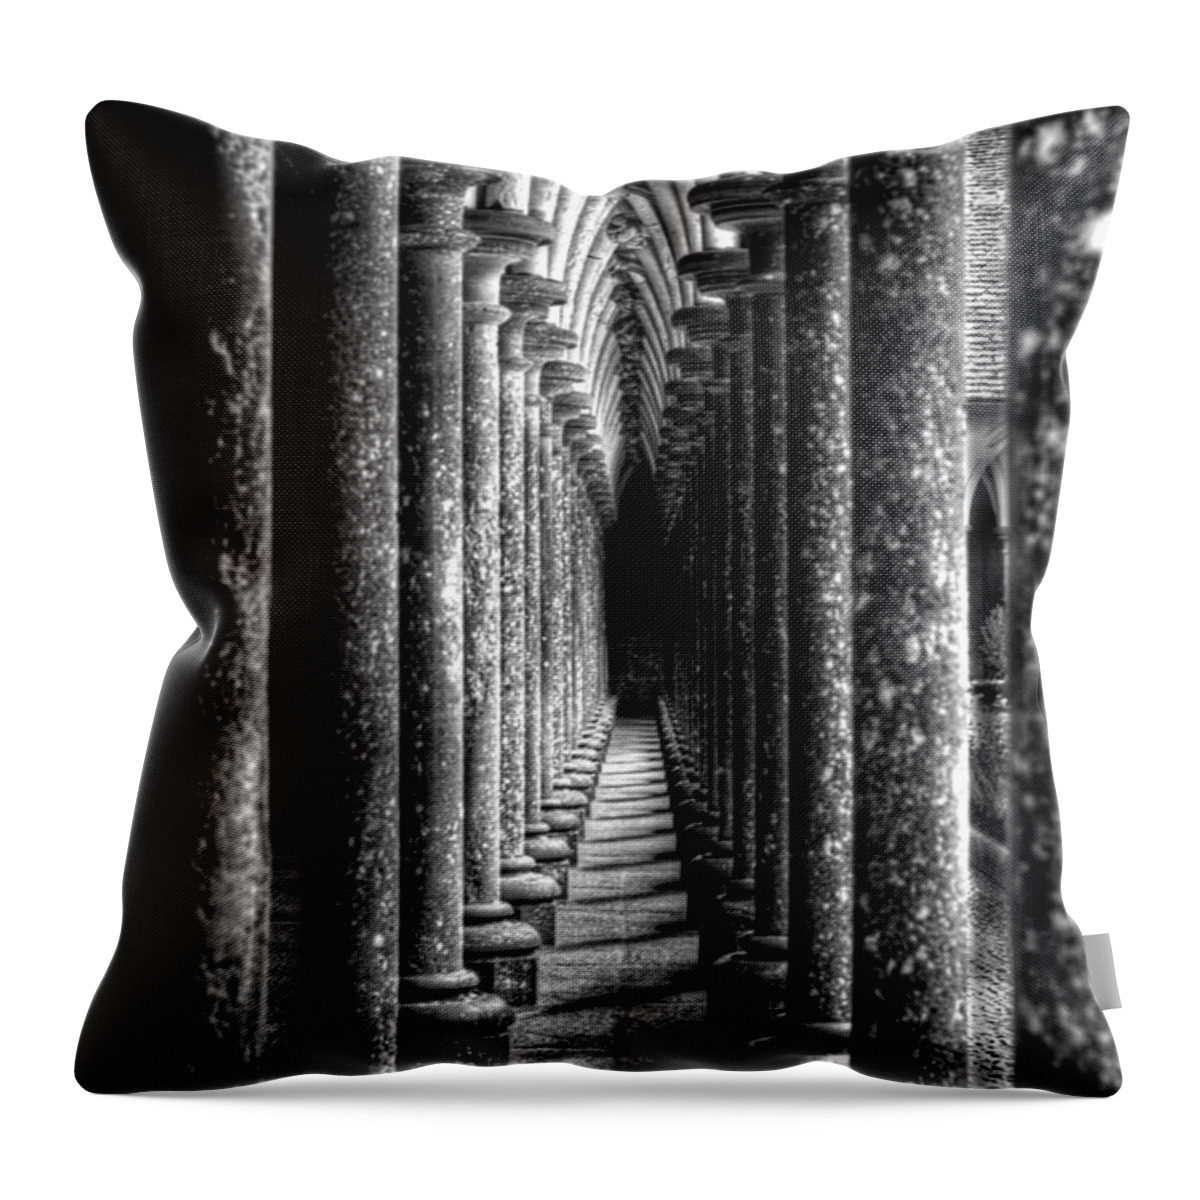 Mont St Michel Throw Pillow featuring the photograph Mont St Michel Pillars by Nigel R Bell